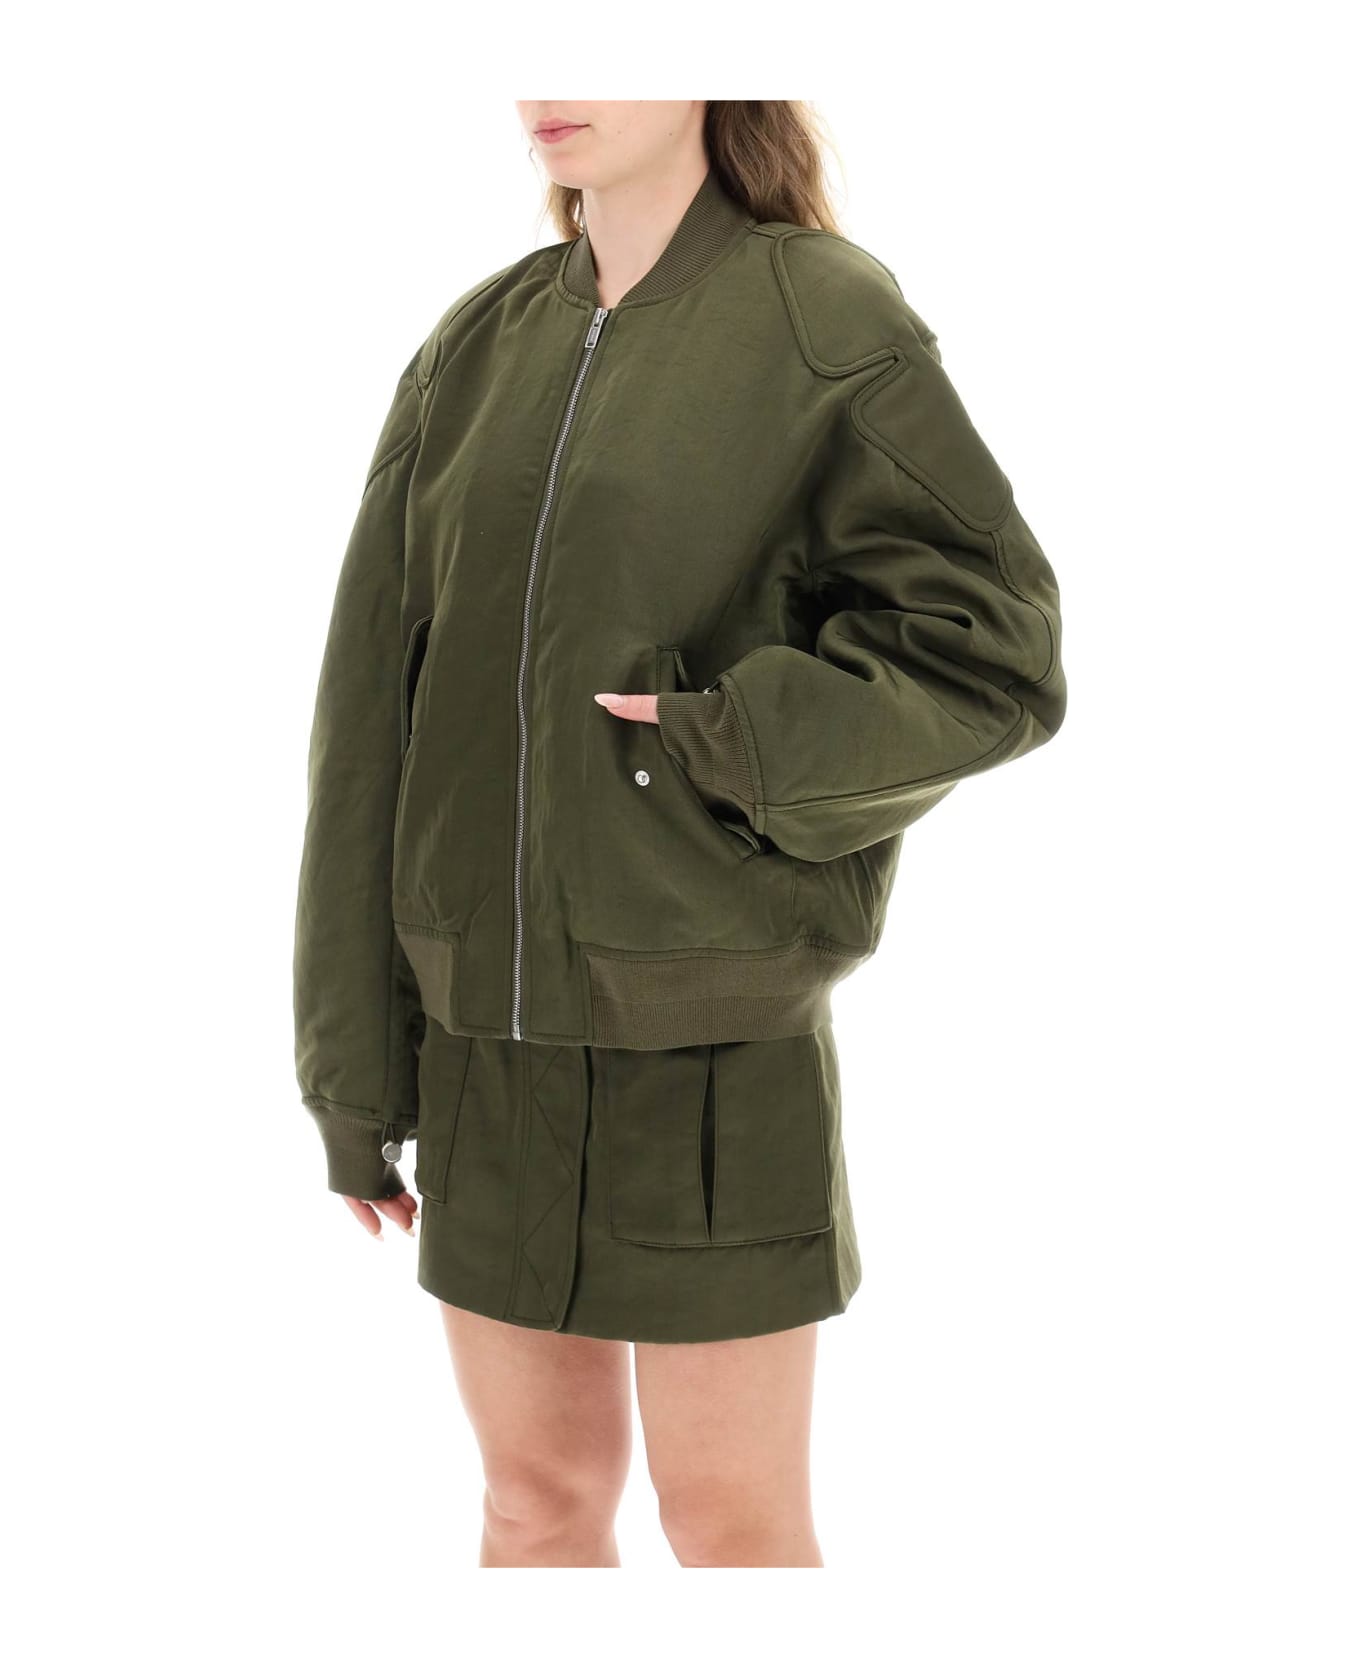 Dion Lee Oversized Technical Nylon Bomber - MILITARY GREEN (Green)